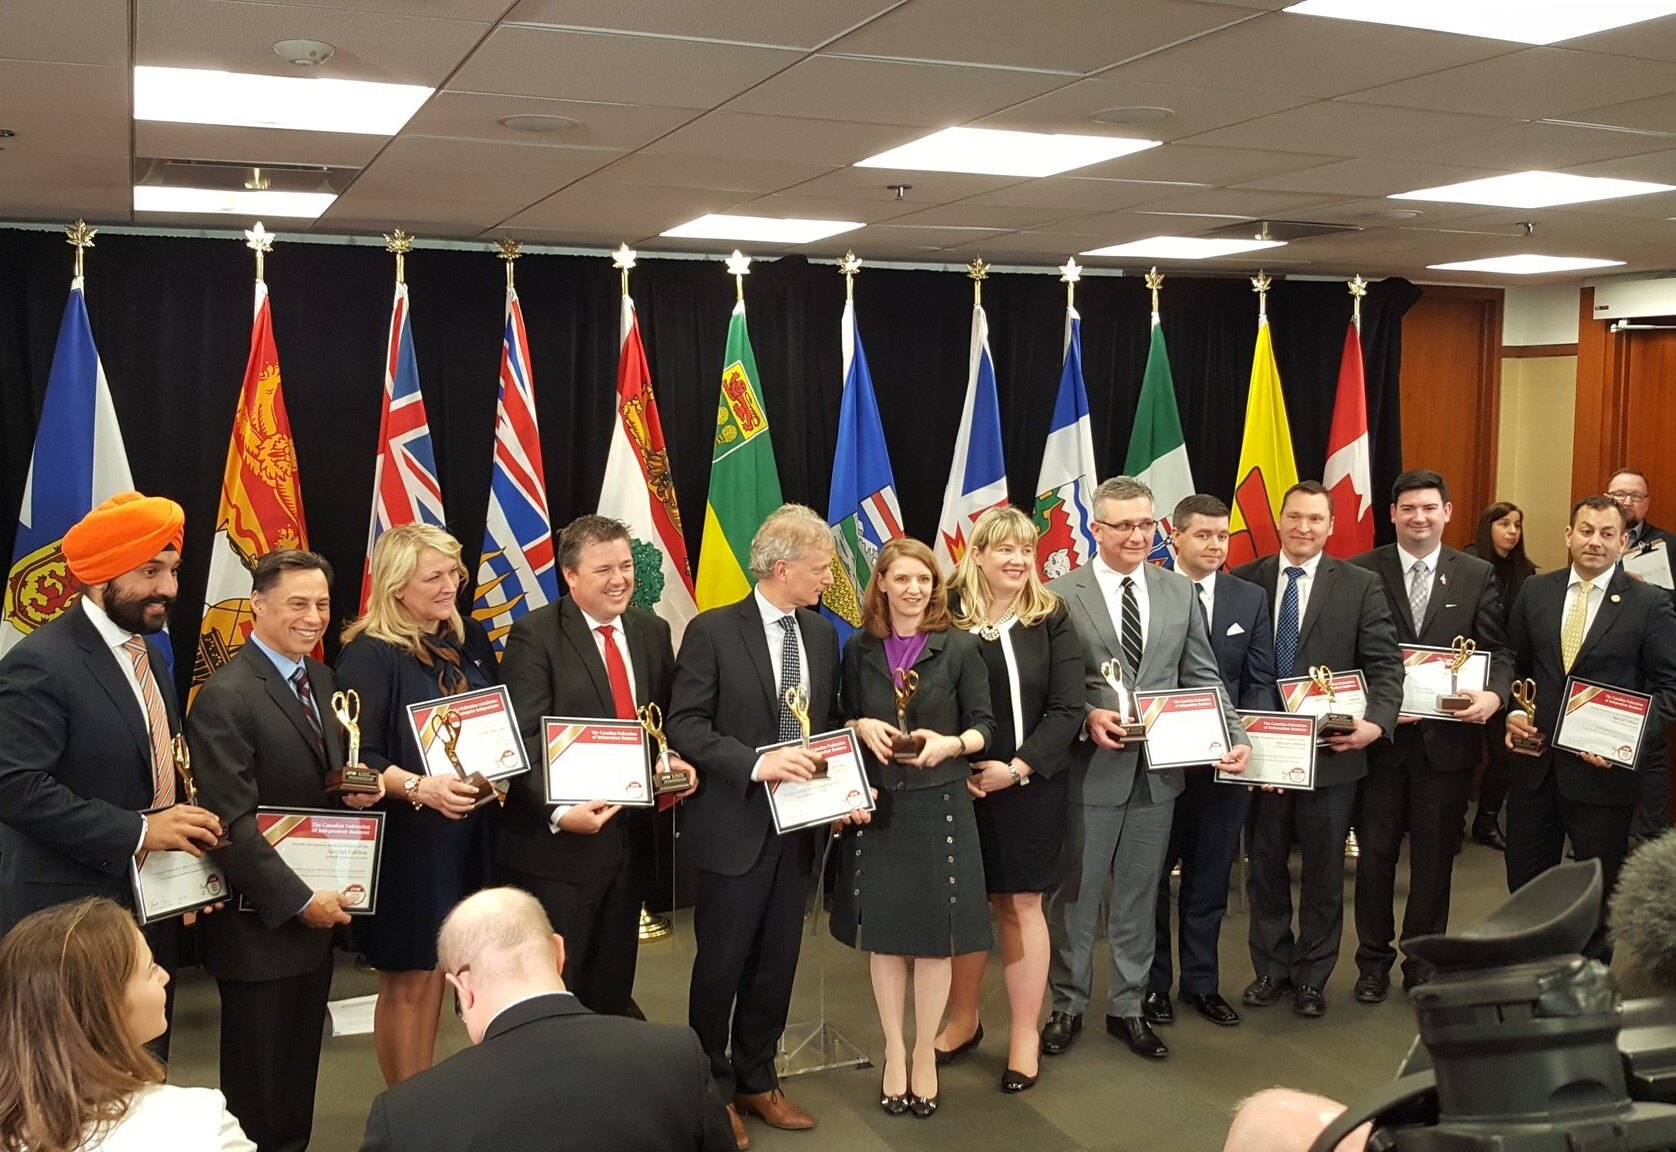 CFIB presents trade ministers with Golden Scissors Award